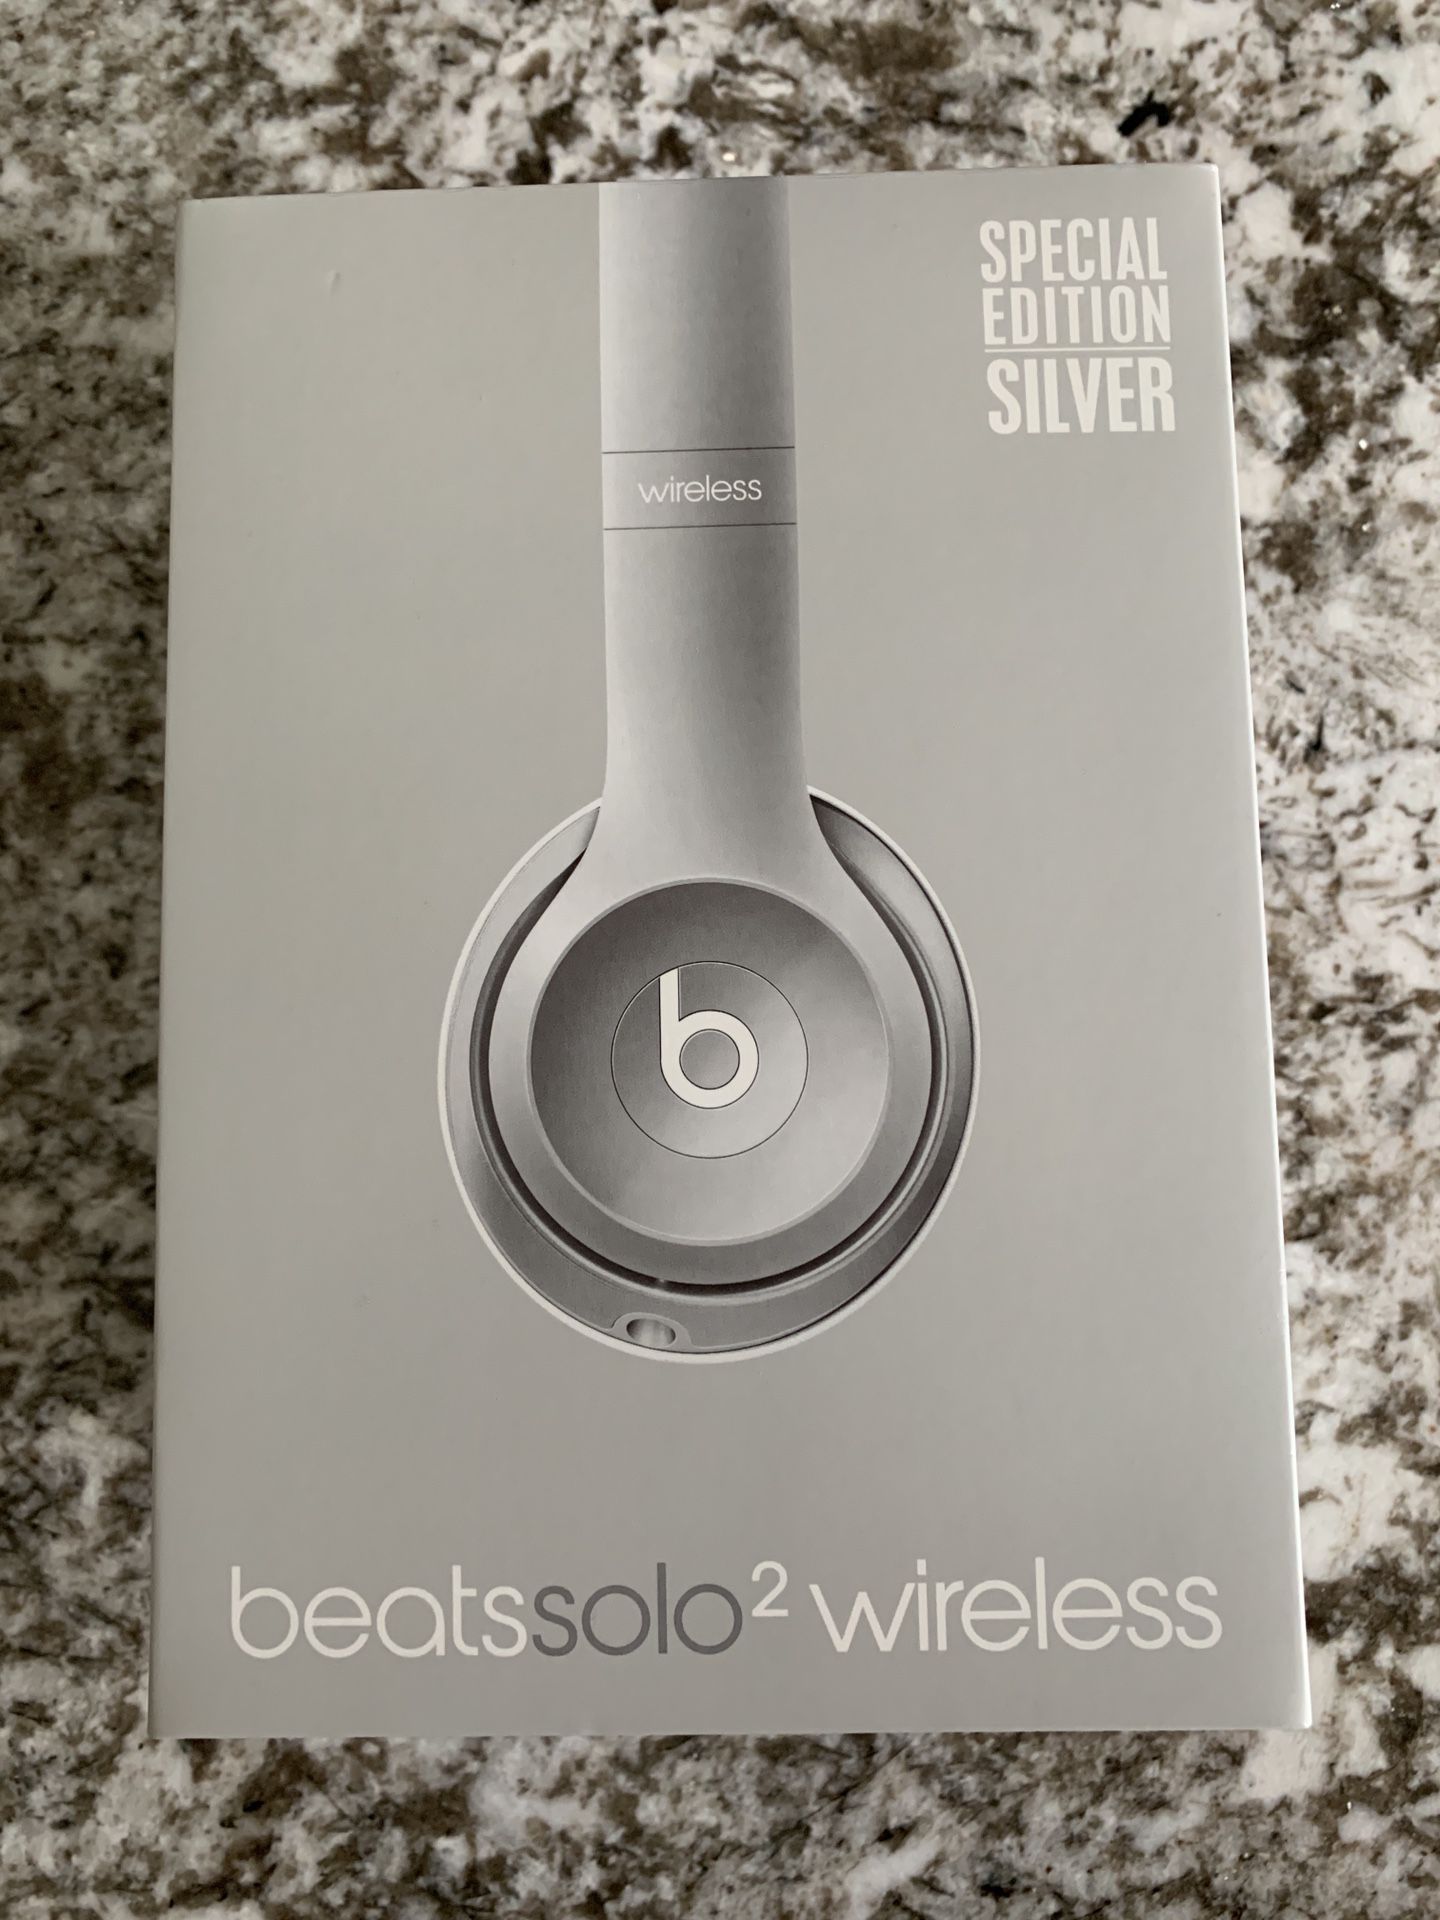 Beats solo 2 wireless limited edition silver